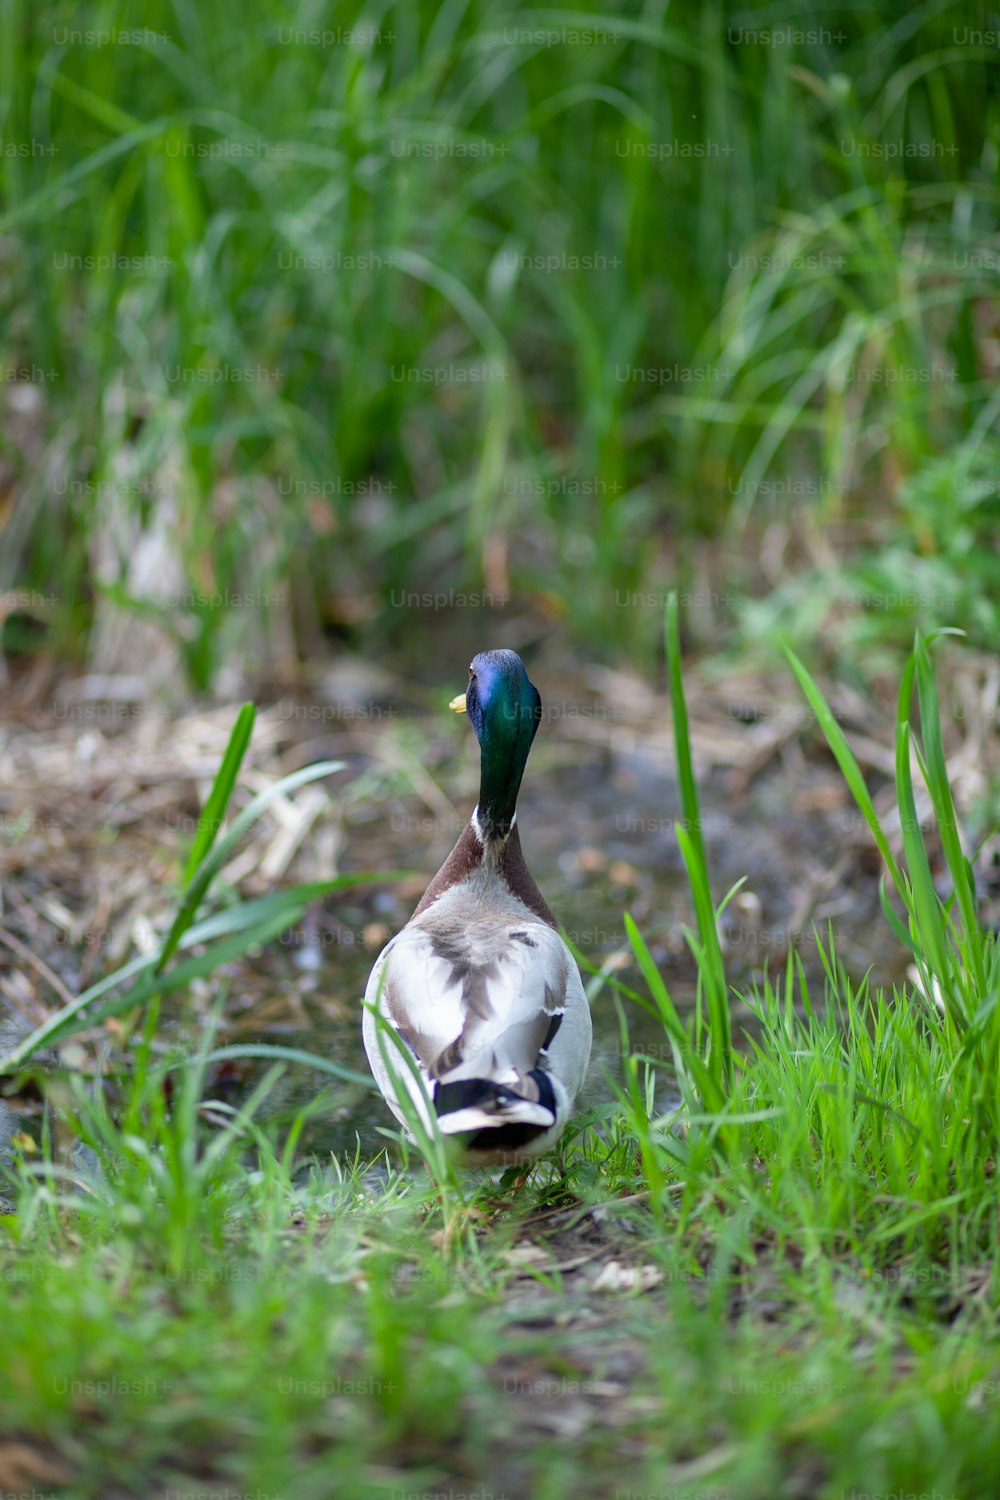 a duck is standing in the grass by itself